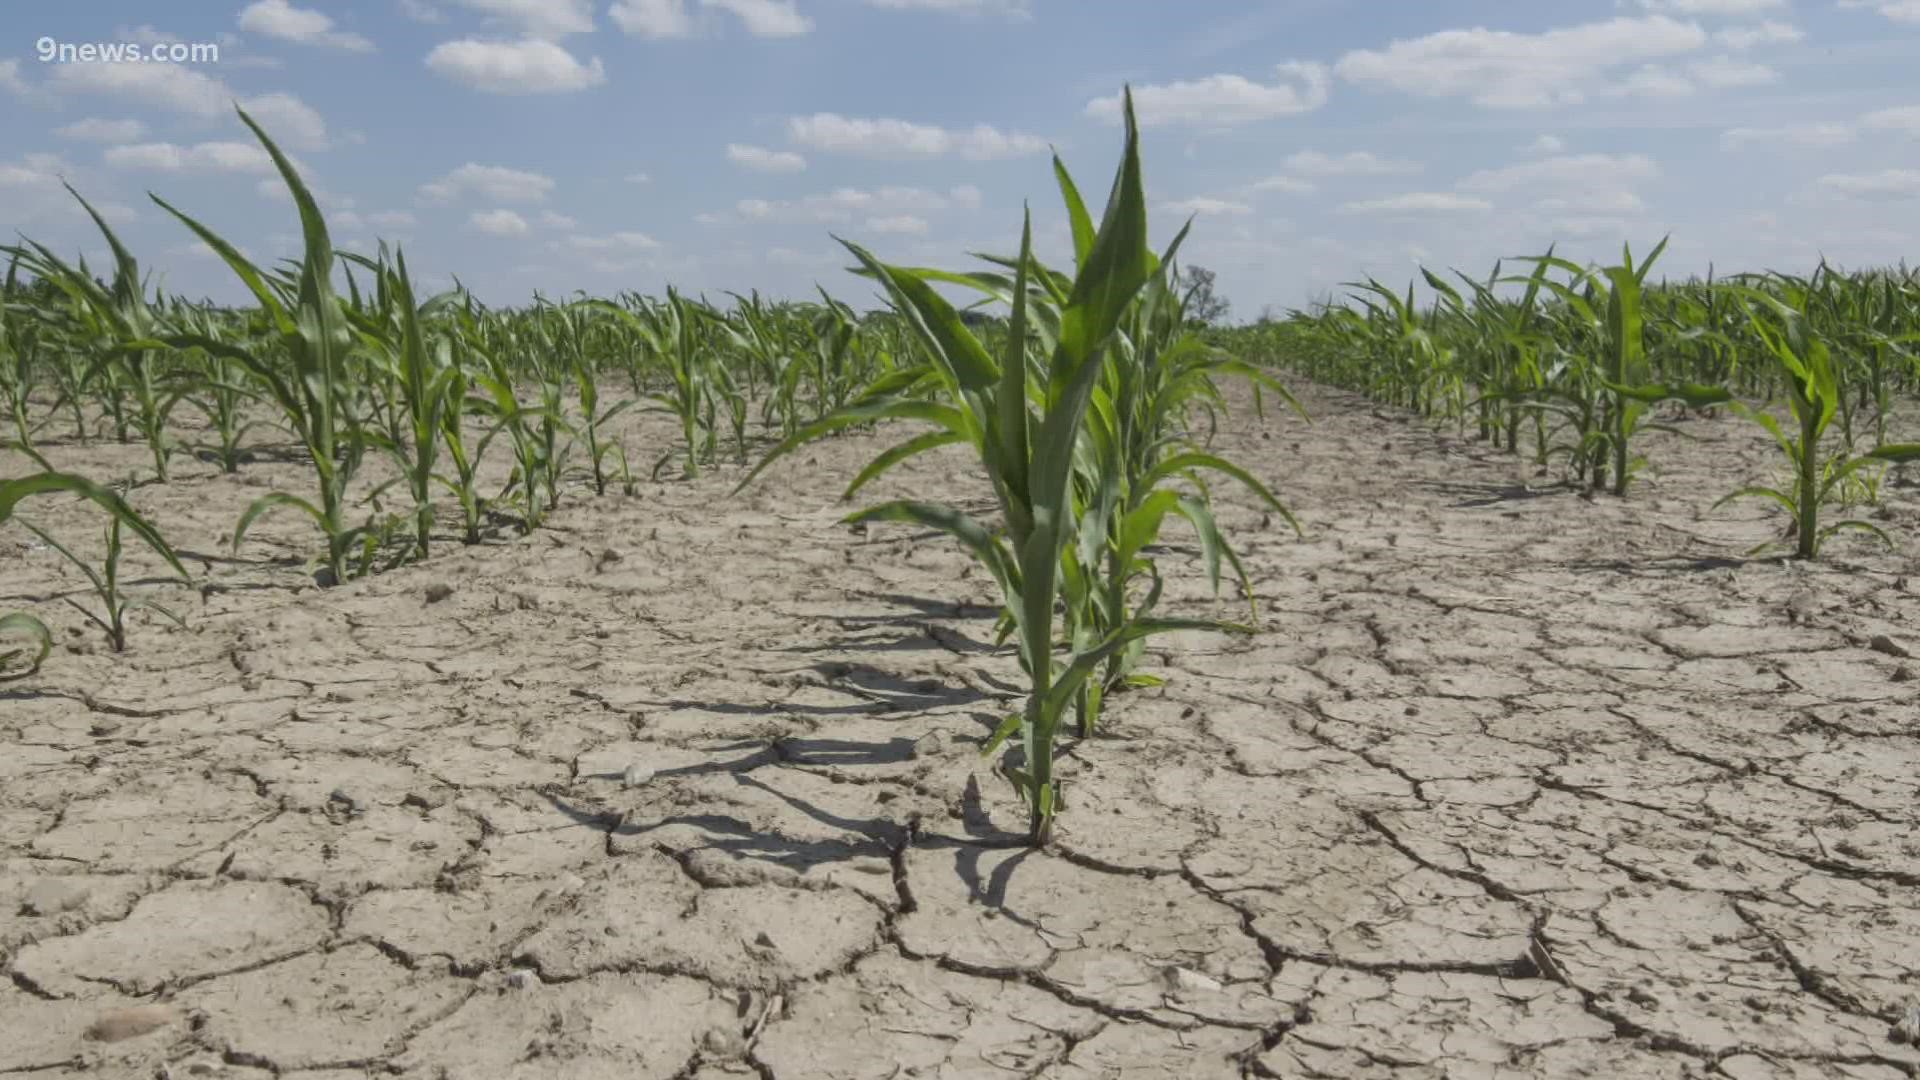 Crops can teach themselves how to defend against drought, by surviving a previous drought. They call it drought memory.